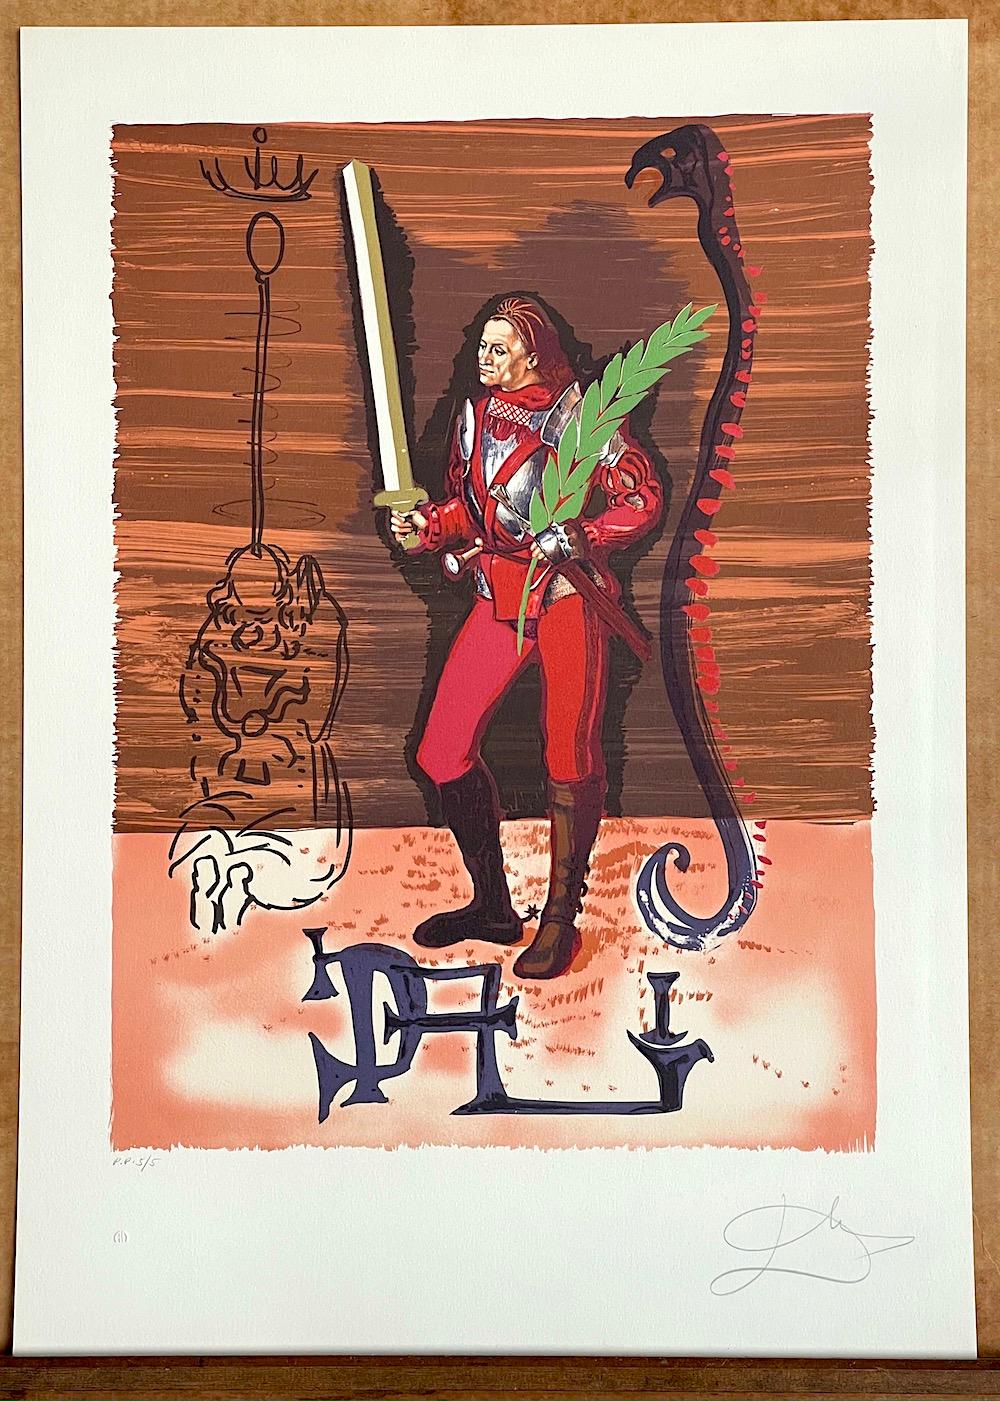 JACK OF SWORDS: Christopher Columbus Discovers America, Signed Lithograph - Surrealist Print by Salvador Dalí